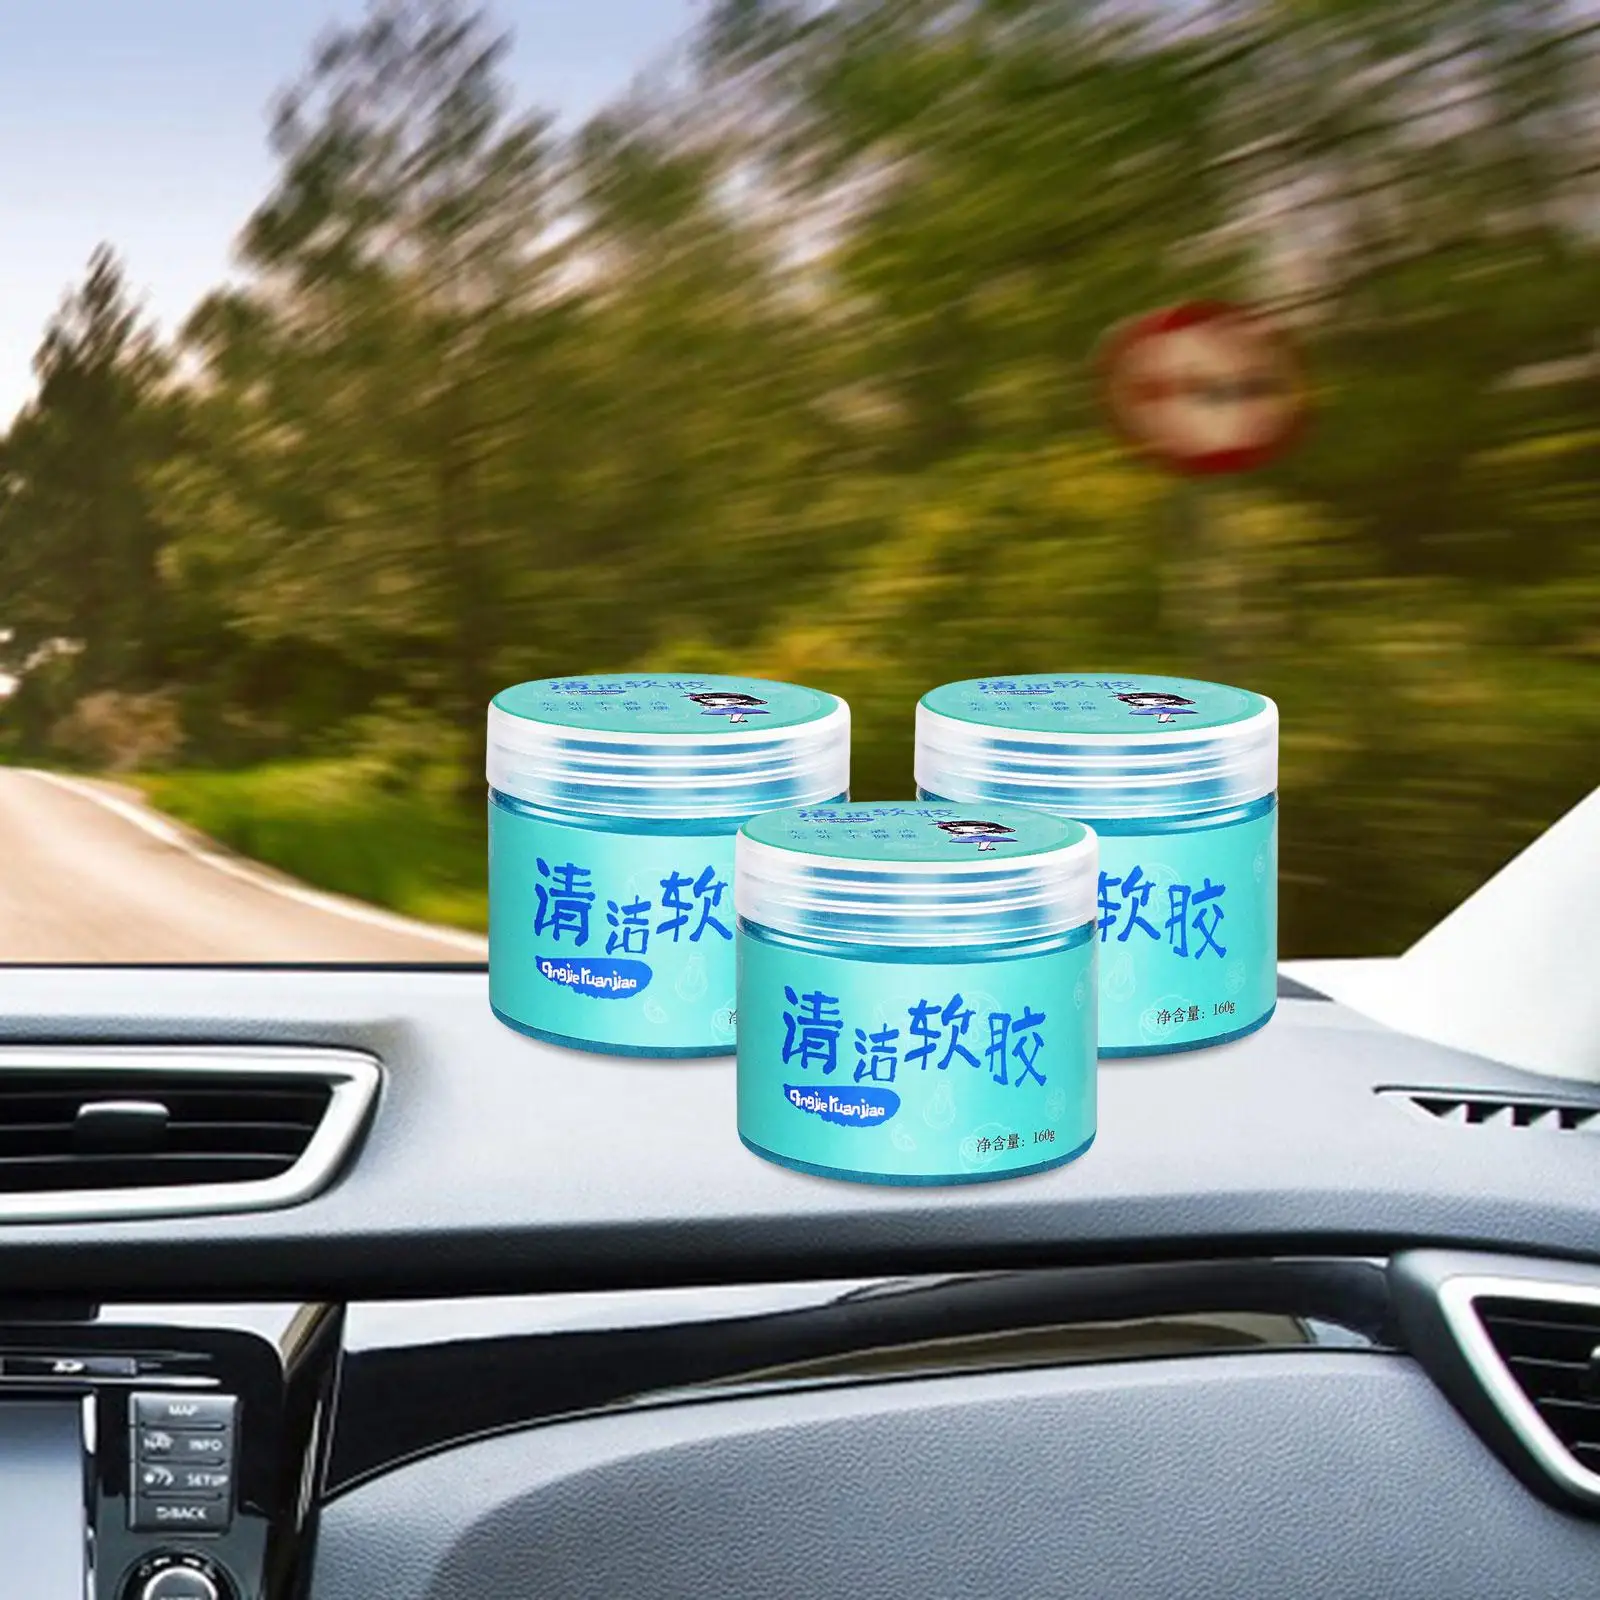 Dust Cleaning Mud Universal Auto Detailing Tools Car Cleaner Putty Interior Car Cleaning Gels for Tablet Office PC Camera Home